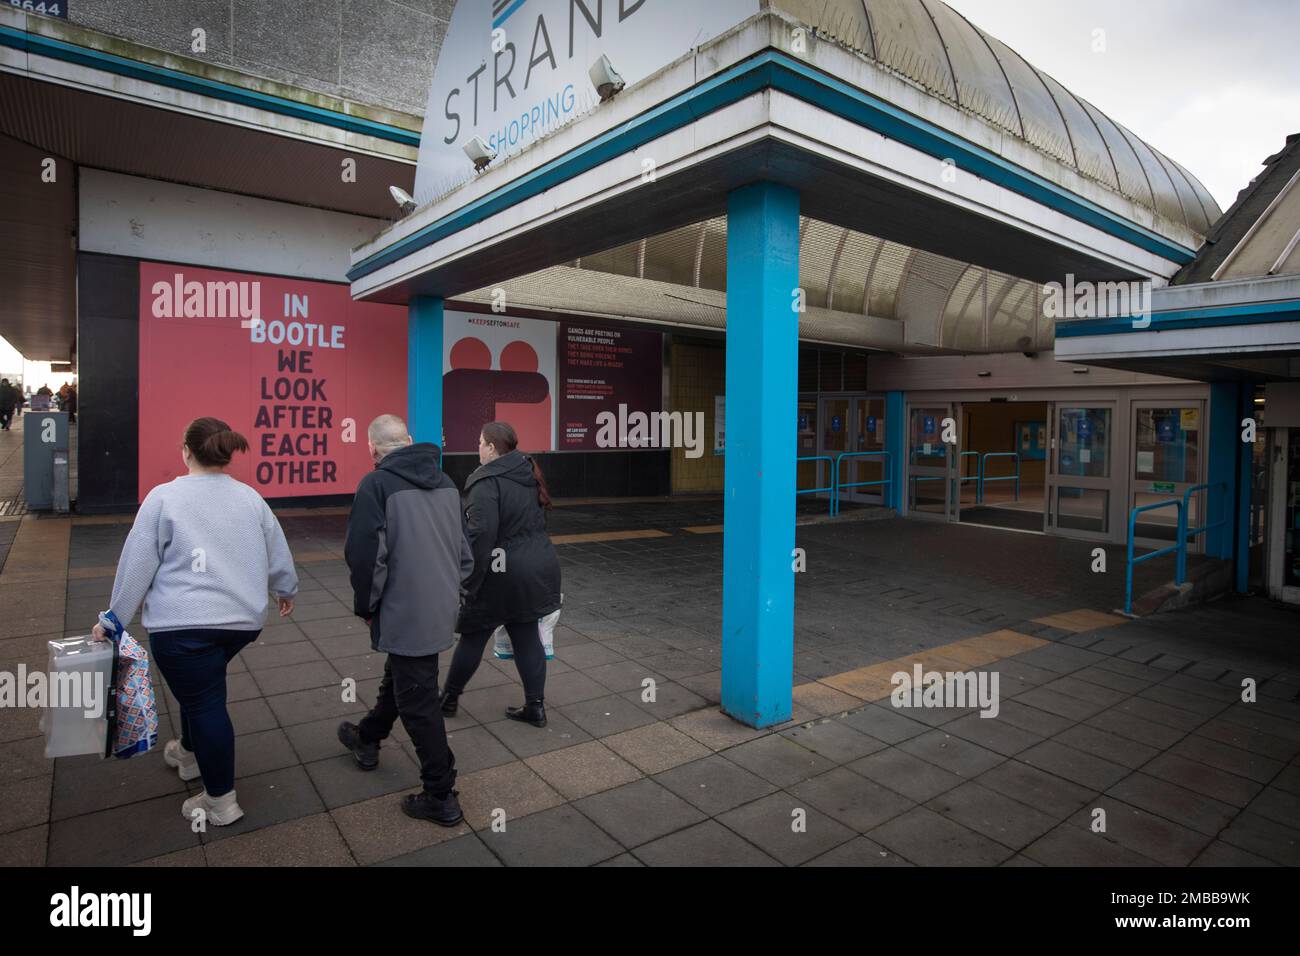 People walking past the entrance to the Strand shopping centre in the town of Bootle, Sefton, which adjoins the city of Liverpool. It was announced in 2015 that the HMRC was set to close its office at Triad House in Bootle, which it was feared would result in job losses in the town. The facility was eventually wound-up in late 2021. Image to illustrate feature on the UK Government’s so-called levelling up agenda. Stock Photo